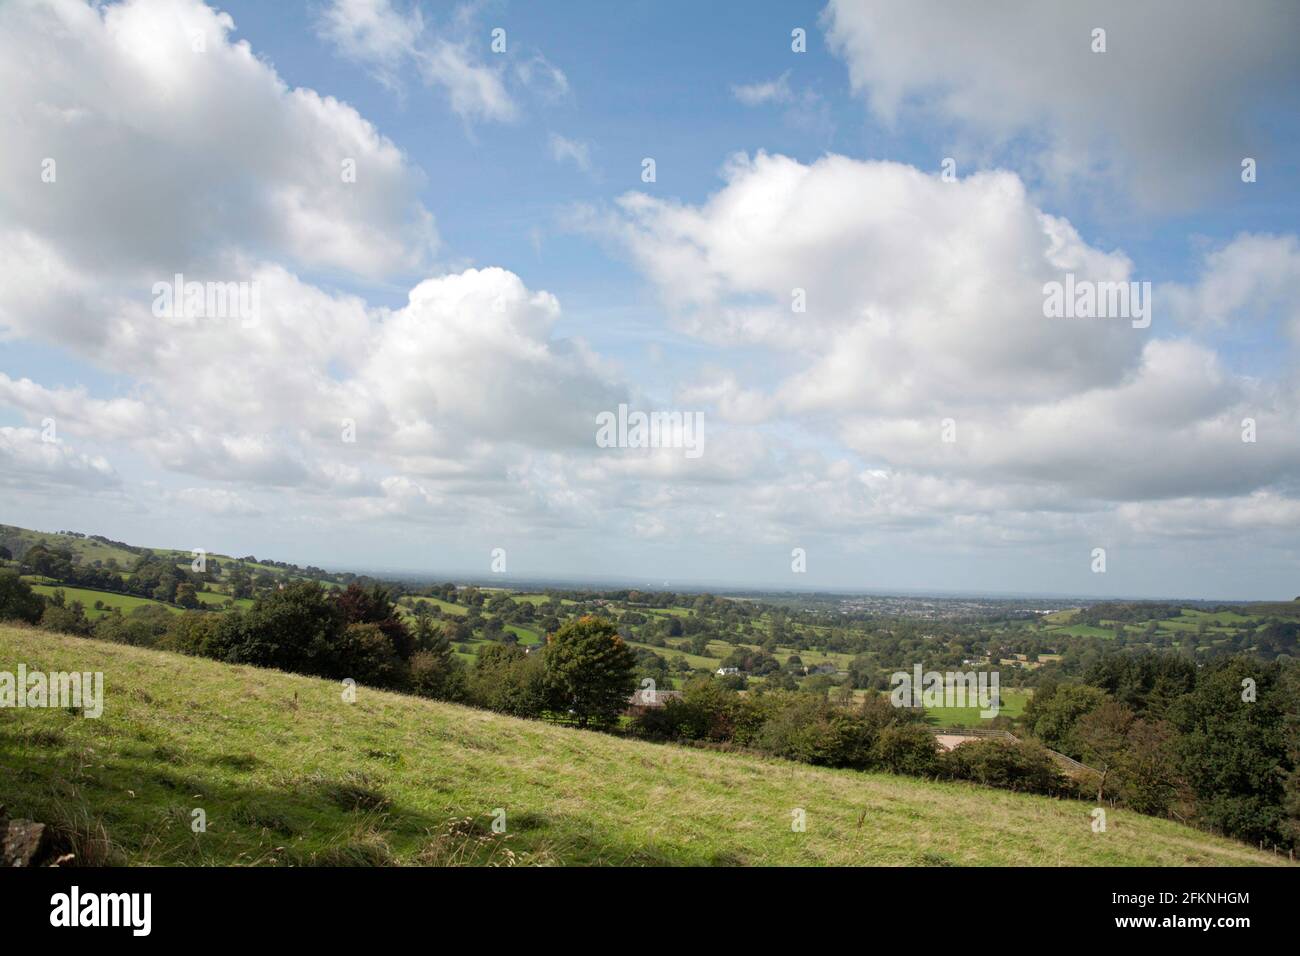 Cloud passing over fields near Macclesfield Cheshire England Stock Photo